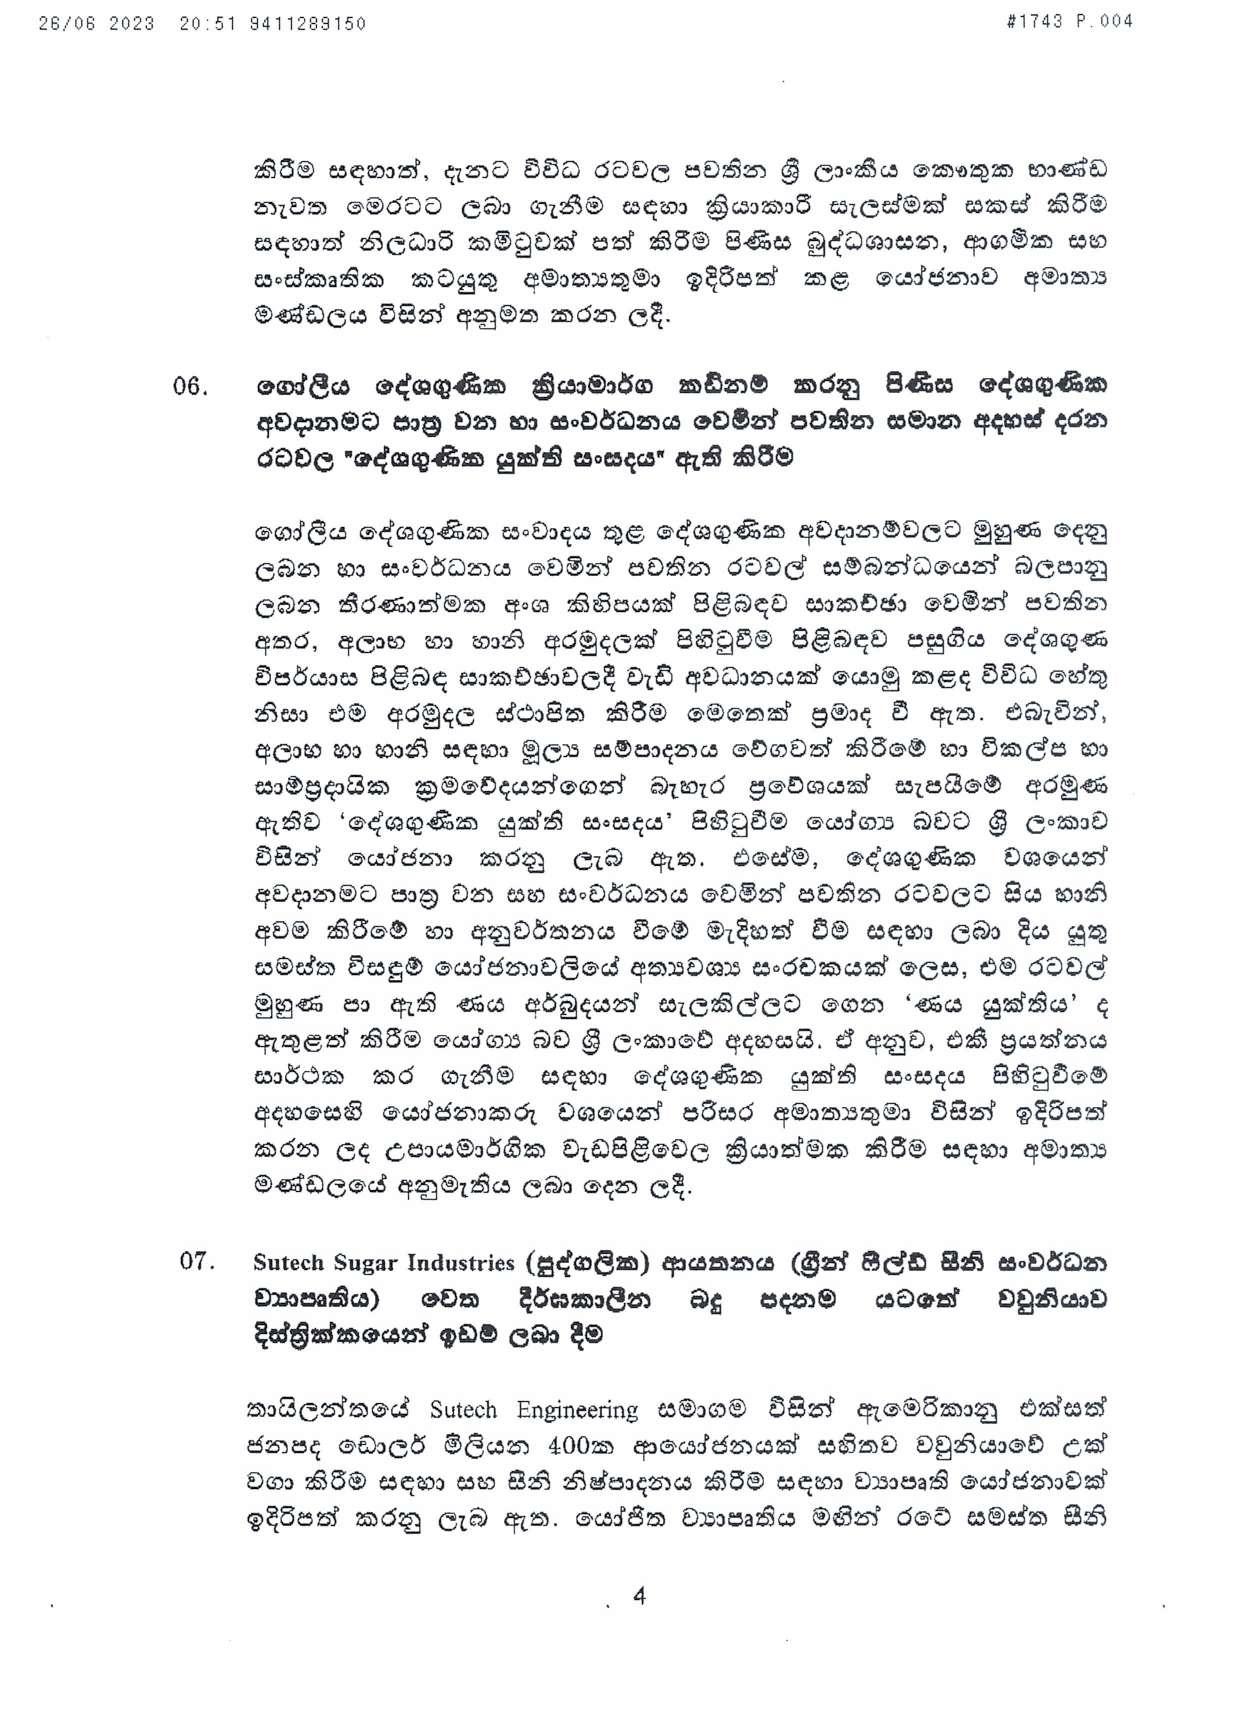 Cabinet Decision on 26.06.2023 page 004